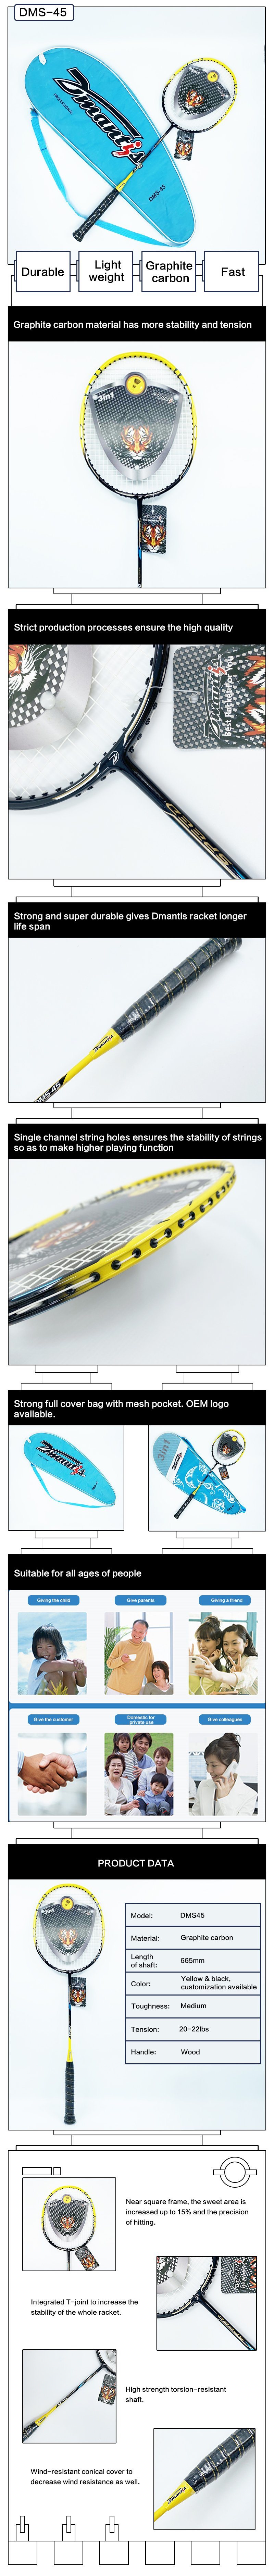 New Product Launch High Tension Carbon Fiber Professional Players Badminton Rackets